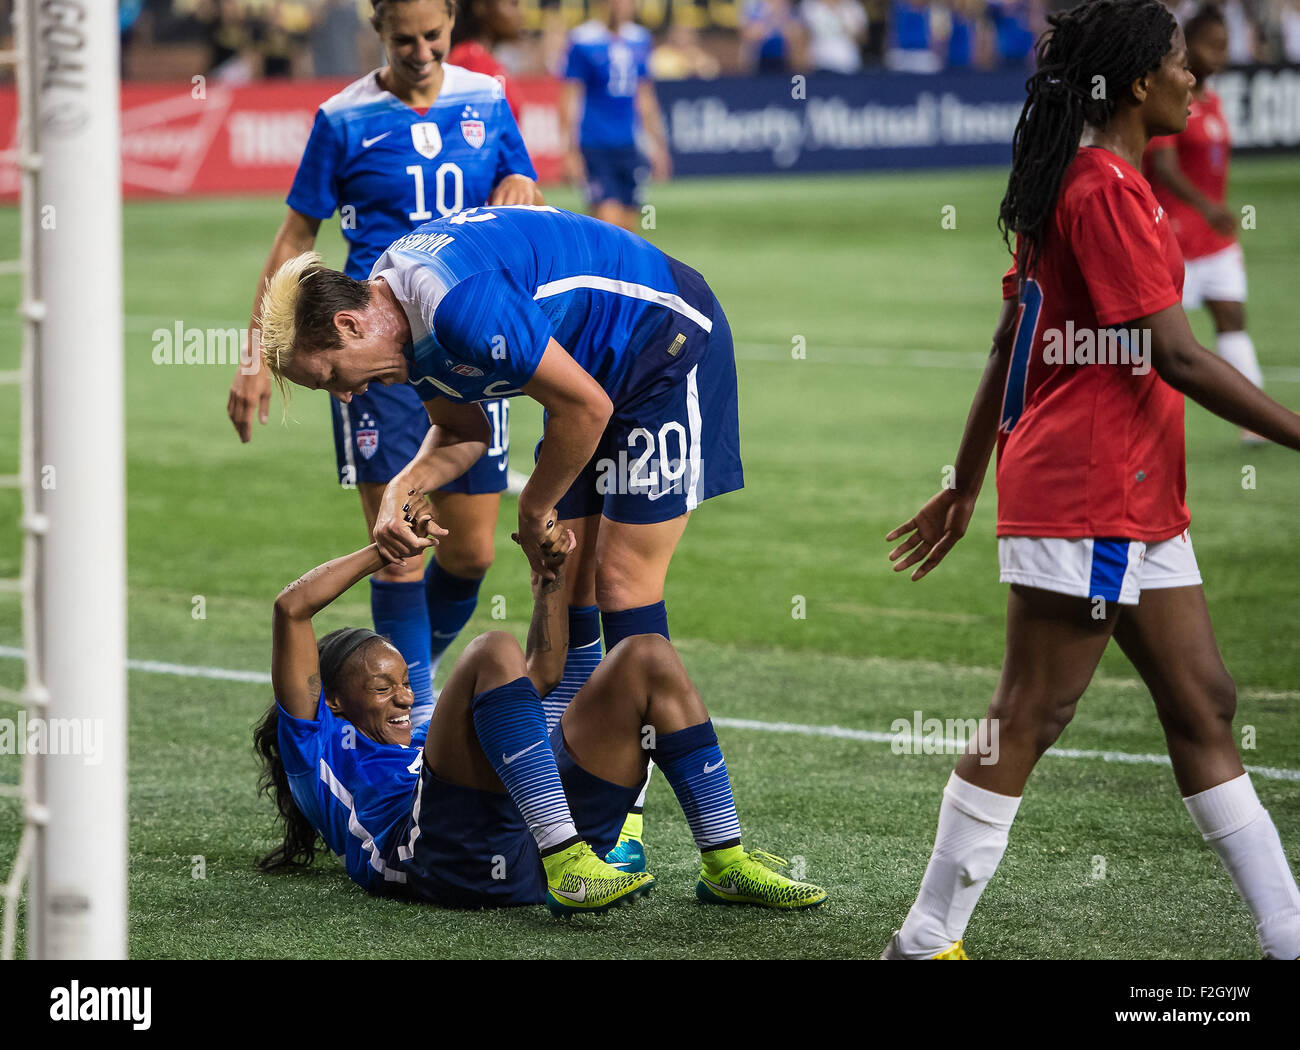 Detroit, Michigan, USA. 17th Sep, 2015. Abby Wambach, USA (20), celebrities the first Team USA goal of Crystal Dunn (25) during the International Friendly Soccer Match between the United States Women's National Team and the Haitian Women's National Team at Ford Field in Detroit, Michigan. USA won the match 5-0. Credit:  Scott Hasse/ZUMA Wire/Alamy Live News Stock Photo